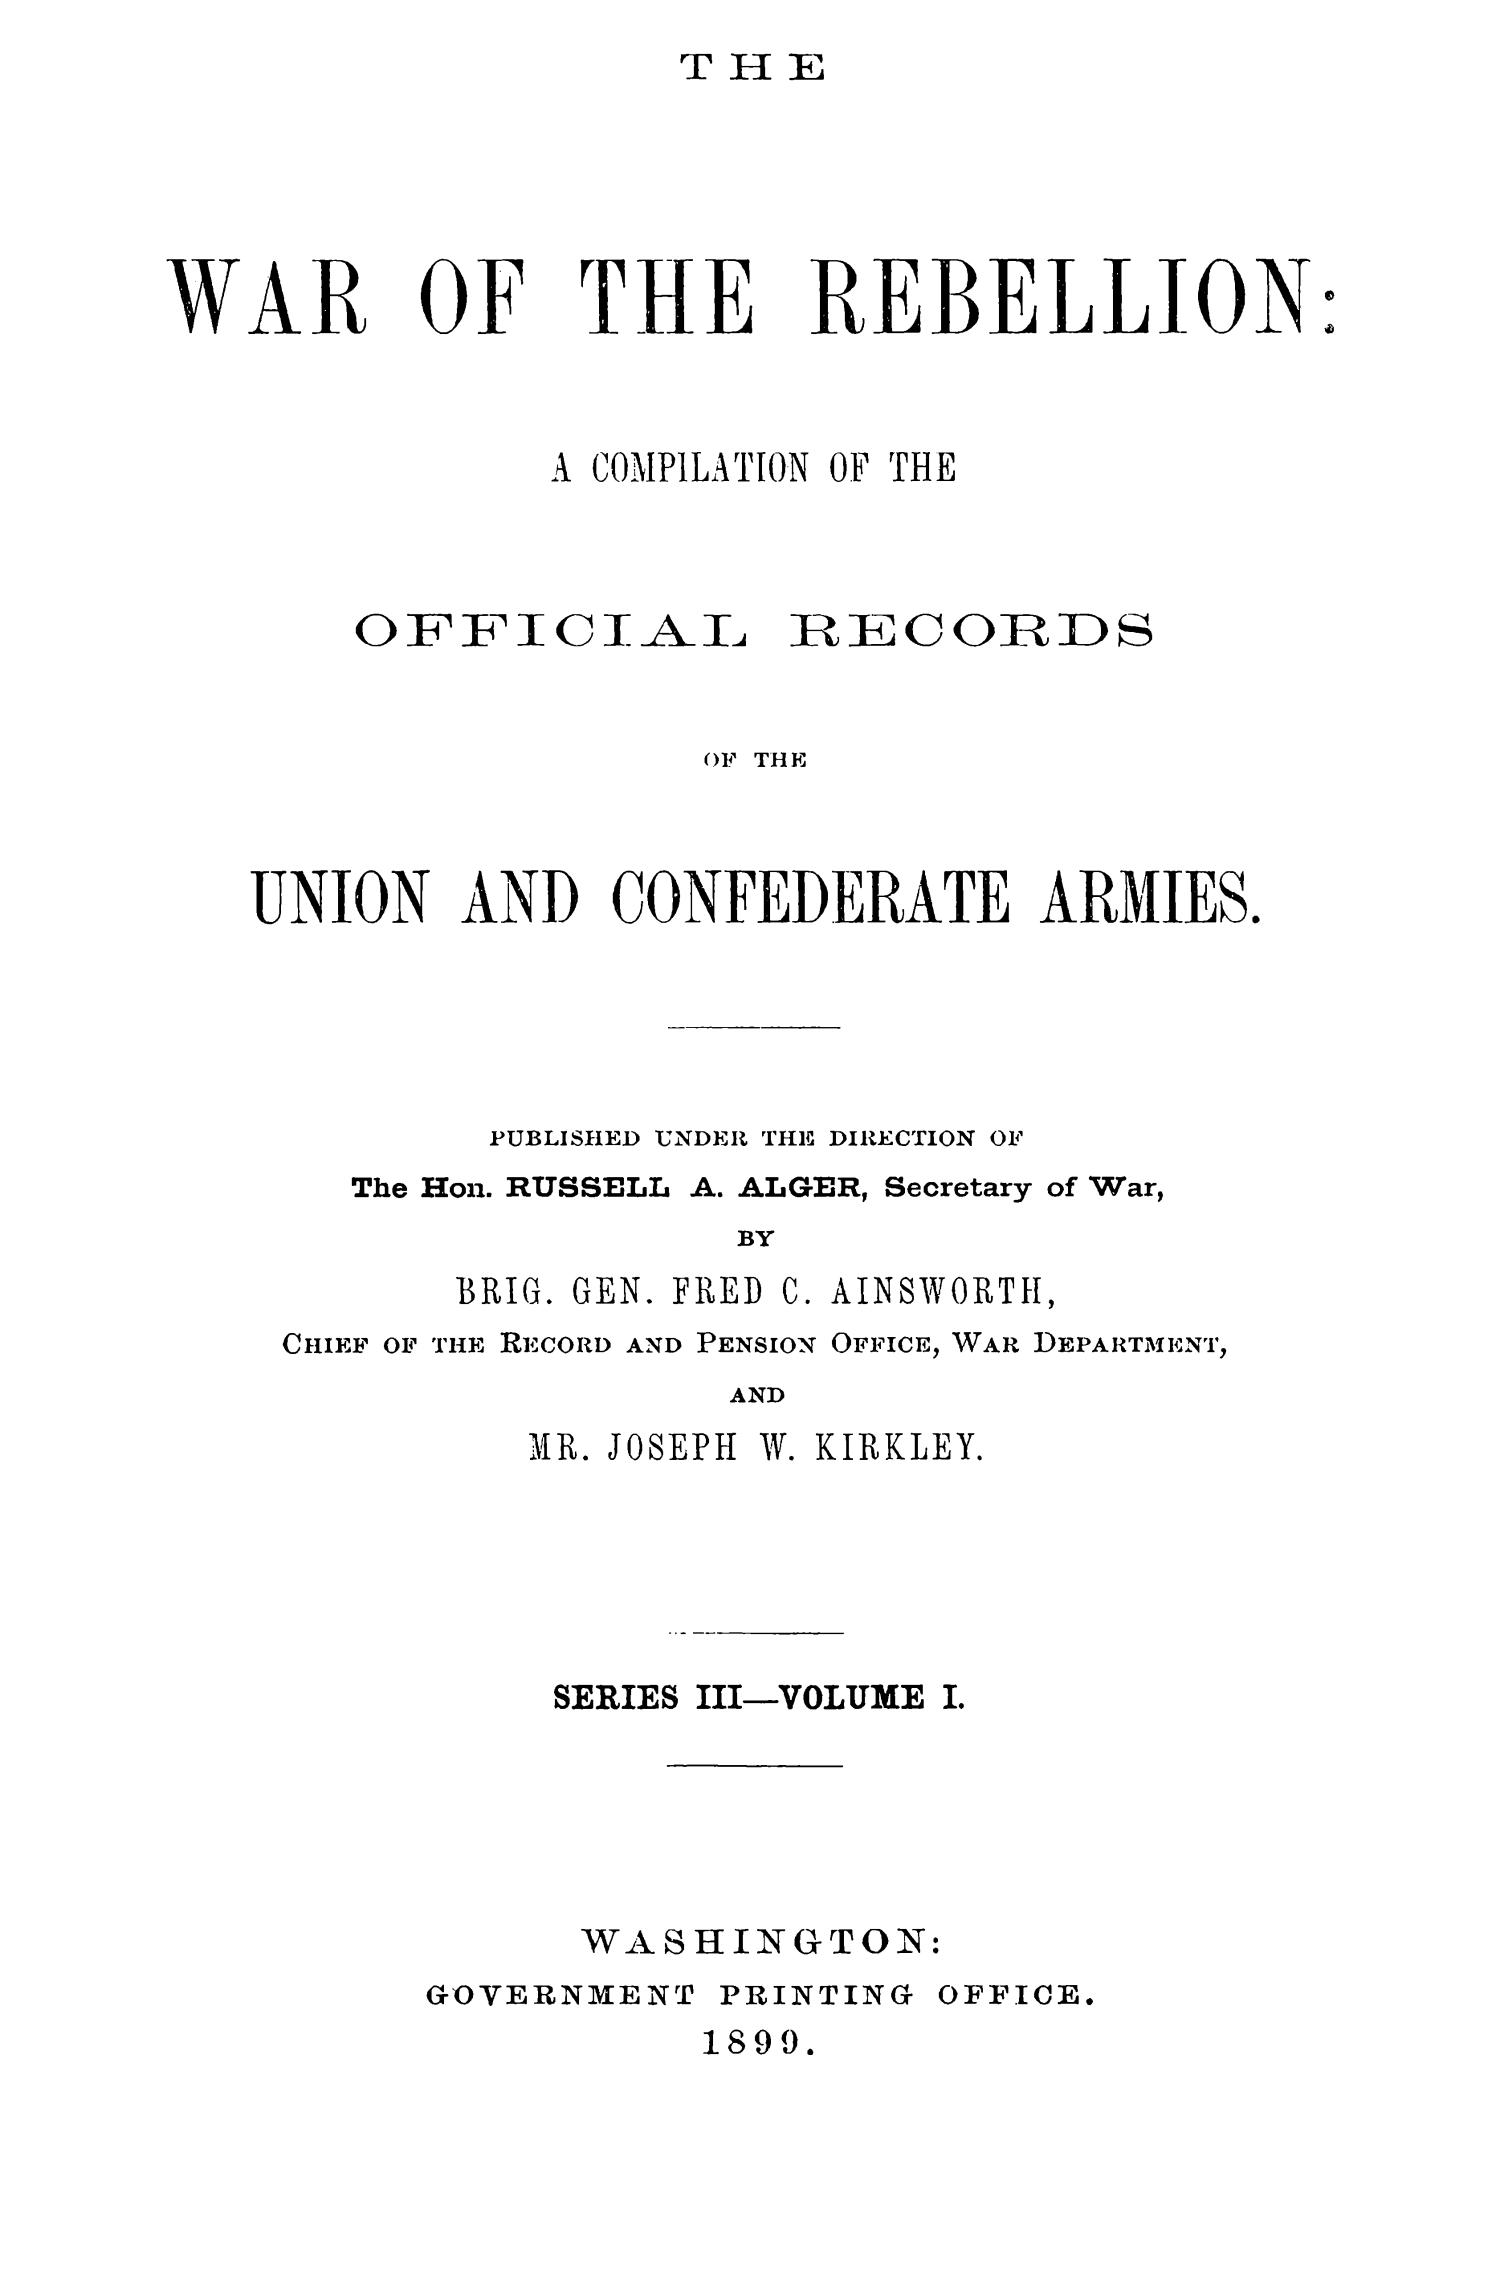 The War of the Rebellion: A Compilation of the Official Records of the Union And Confederate Armies. Series 3, Volume 1.
                                                
                                                    Title Page
                                                